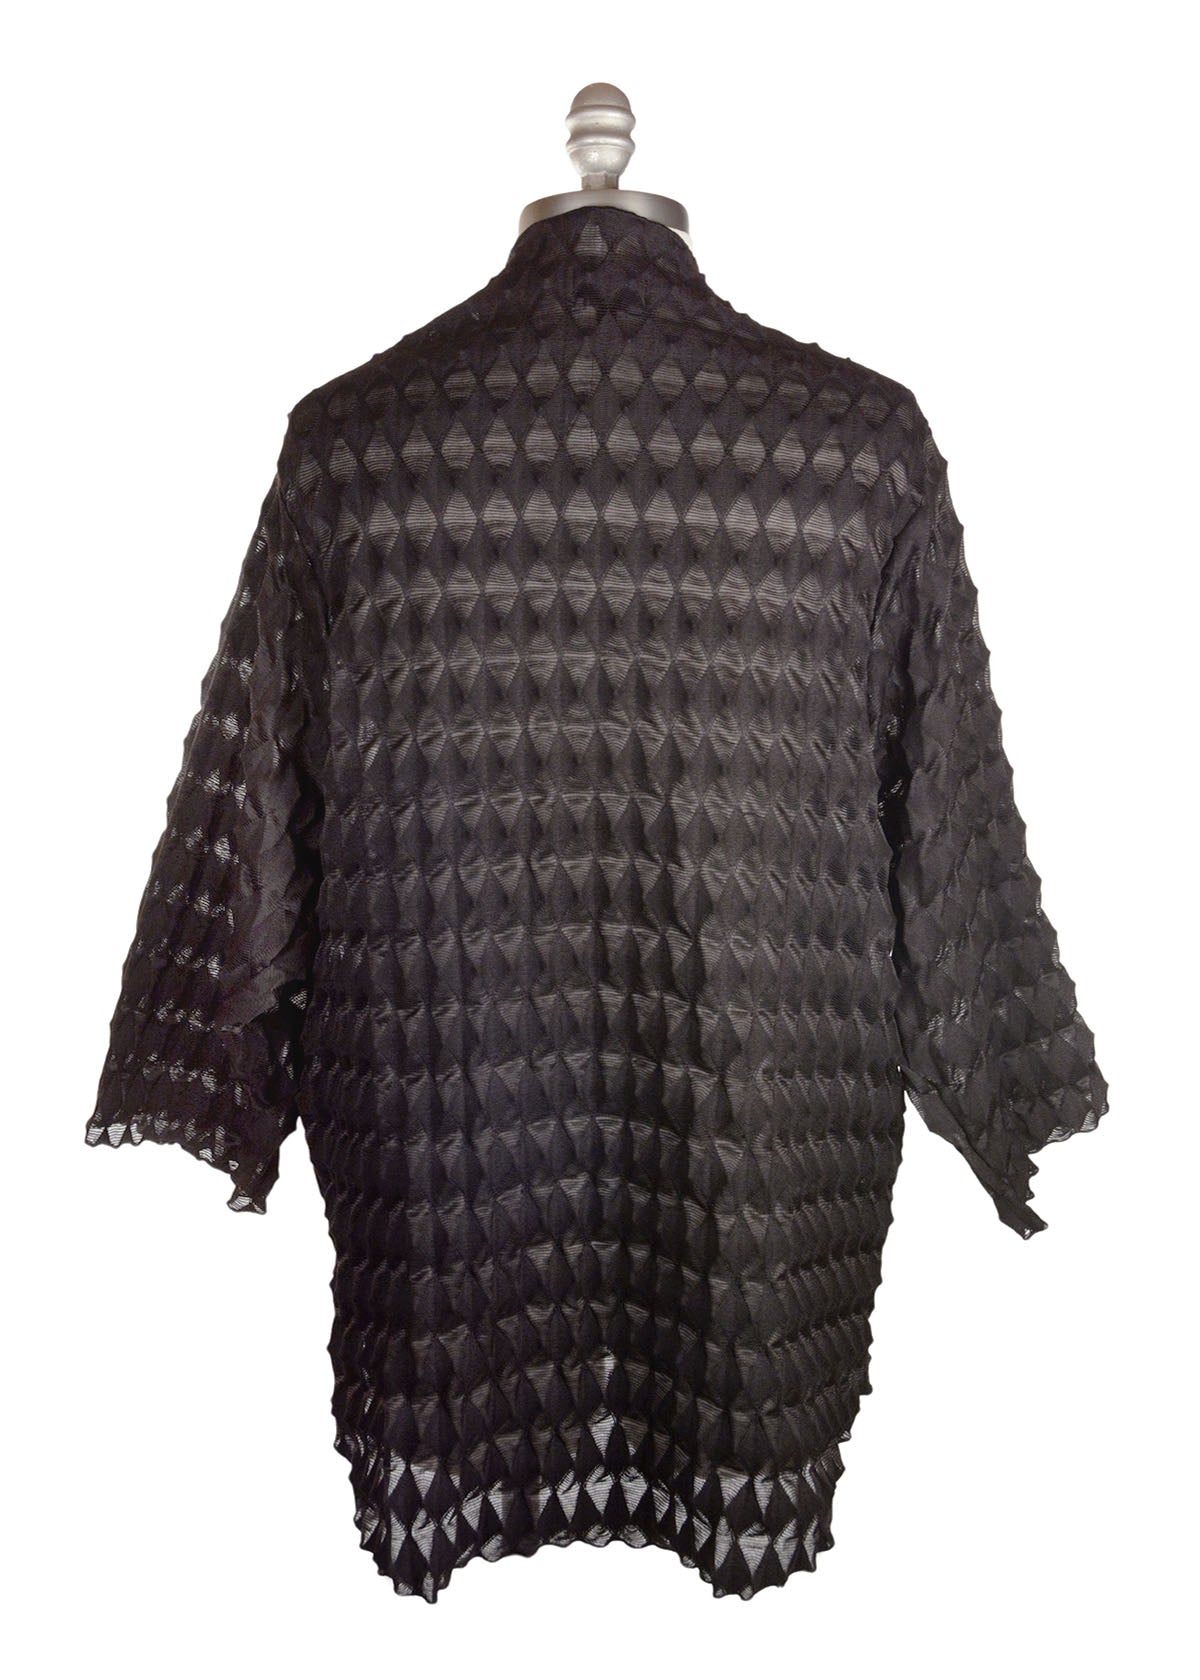 Product photo of the Fractal Collection Black Cardigan, back view. LYC by Pandemonium is handmade in Seattle, WA, USA.